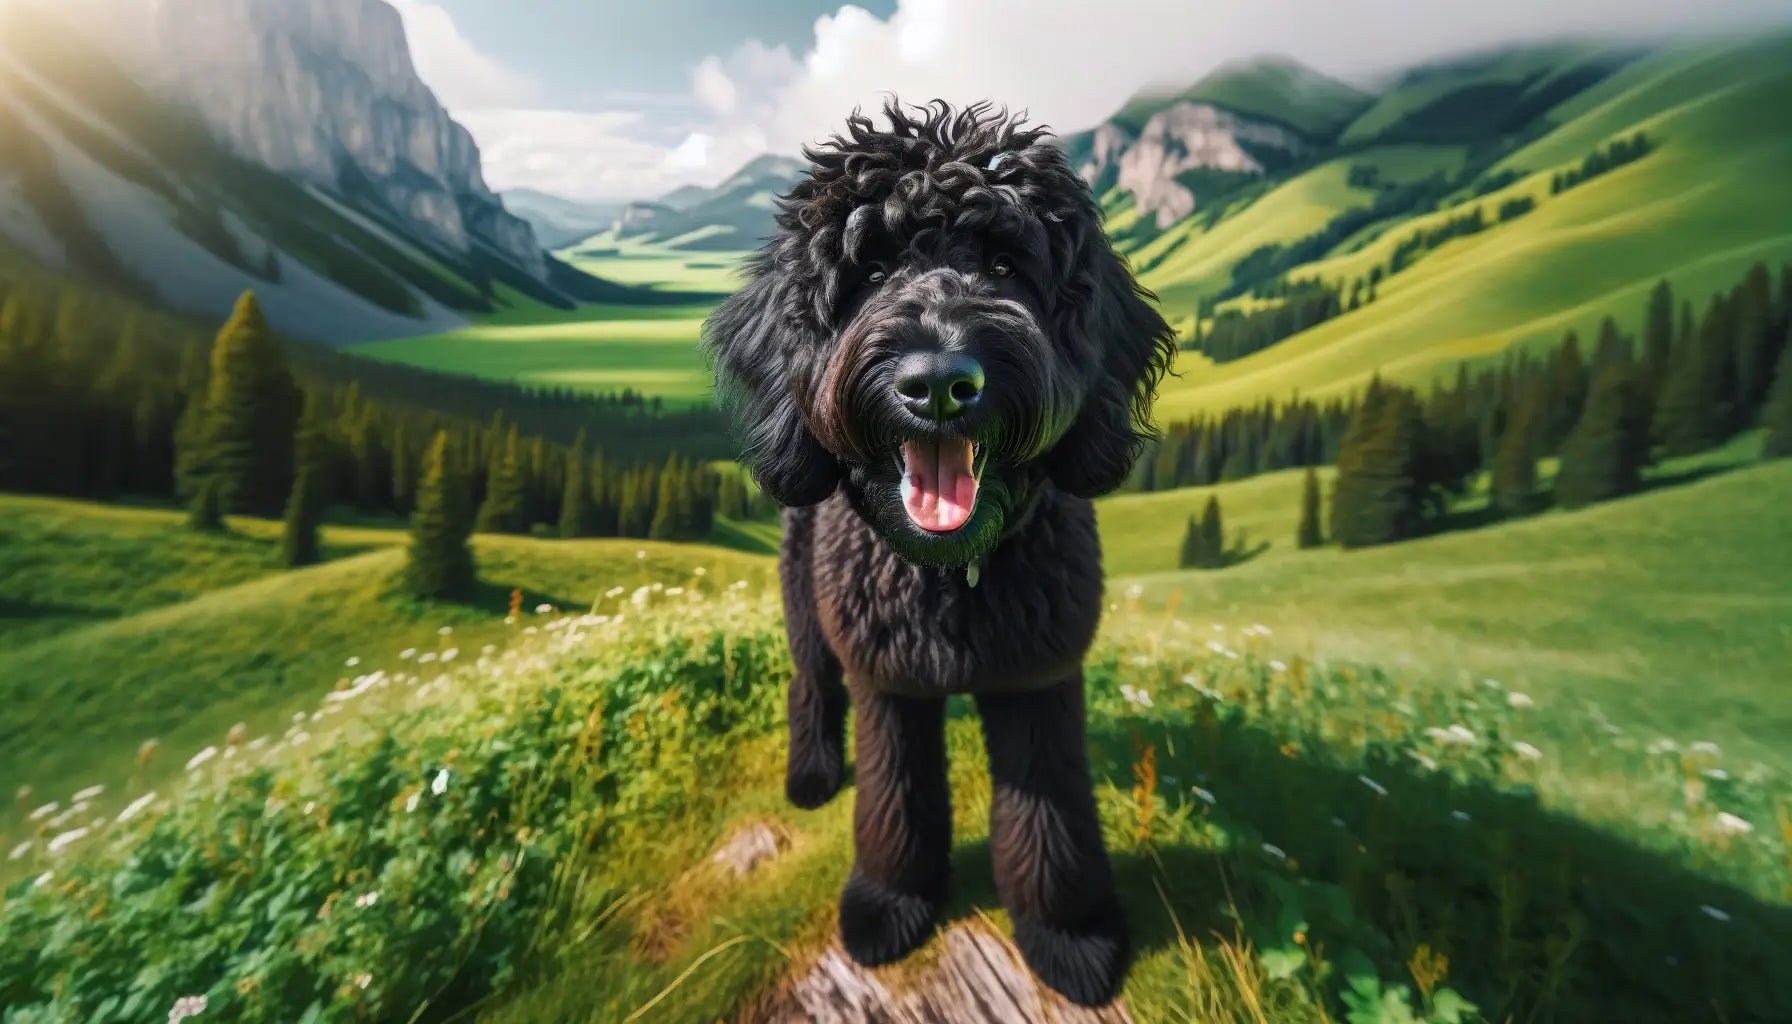 Black Goldendoodle standing on a green hillside with a scenic mountainous background, showcasing its curly black fur and a happy demeanor.